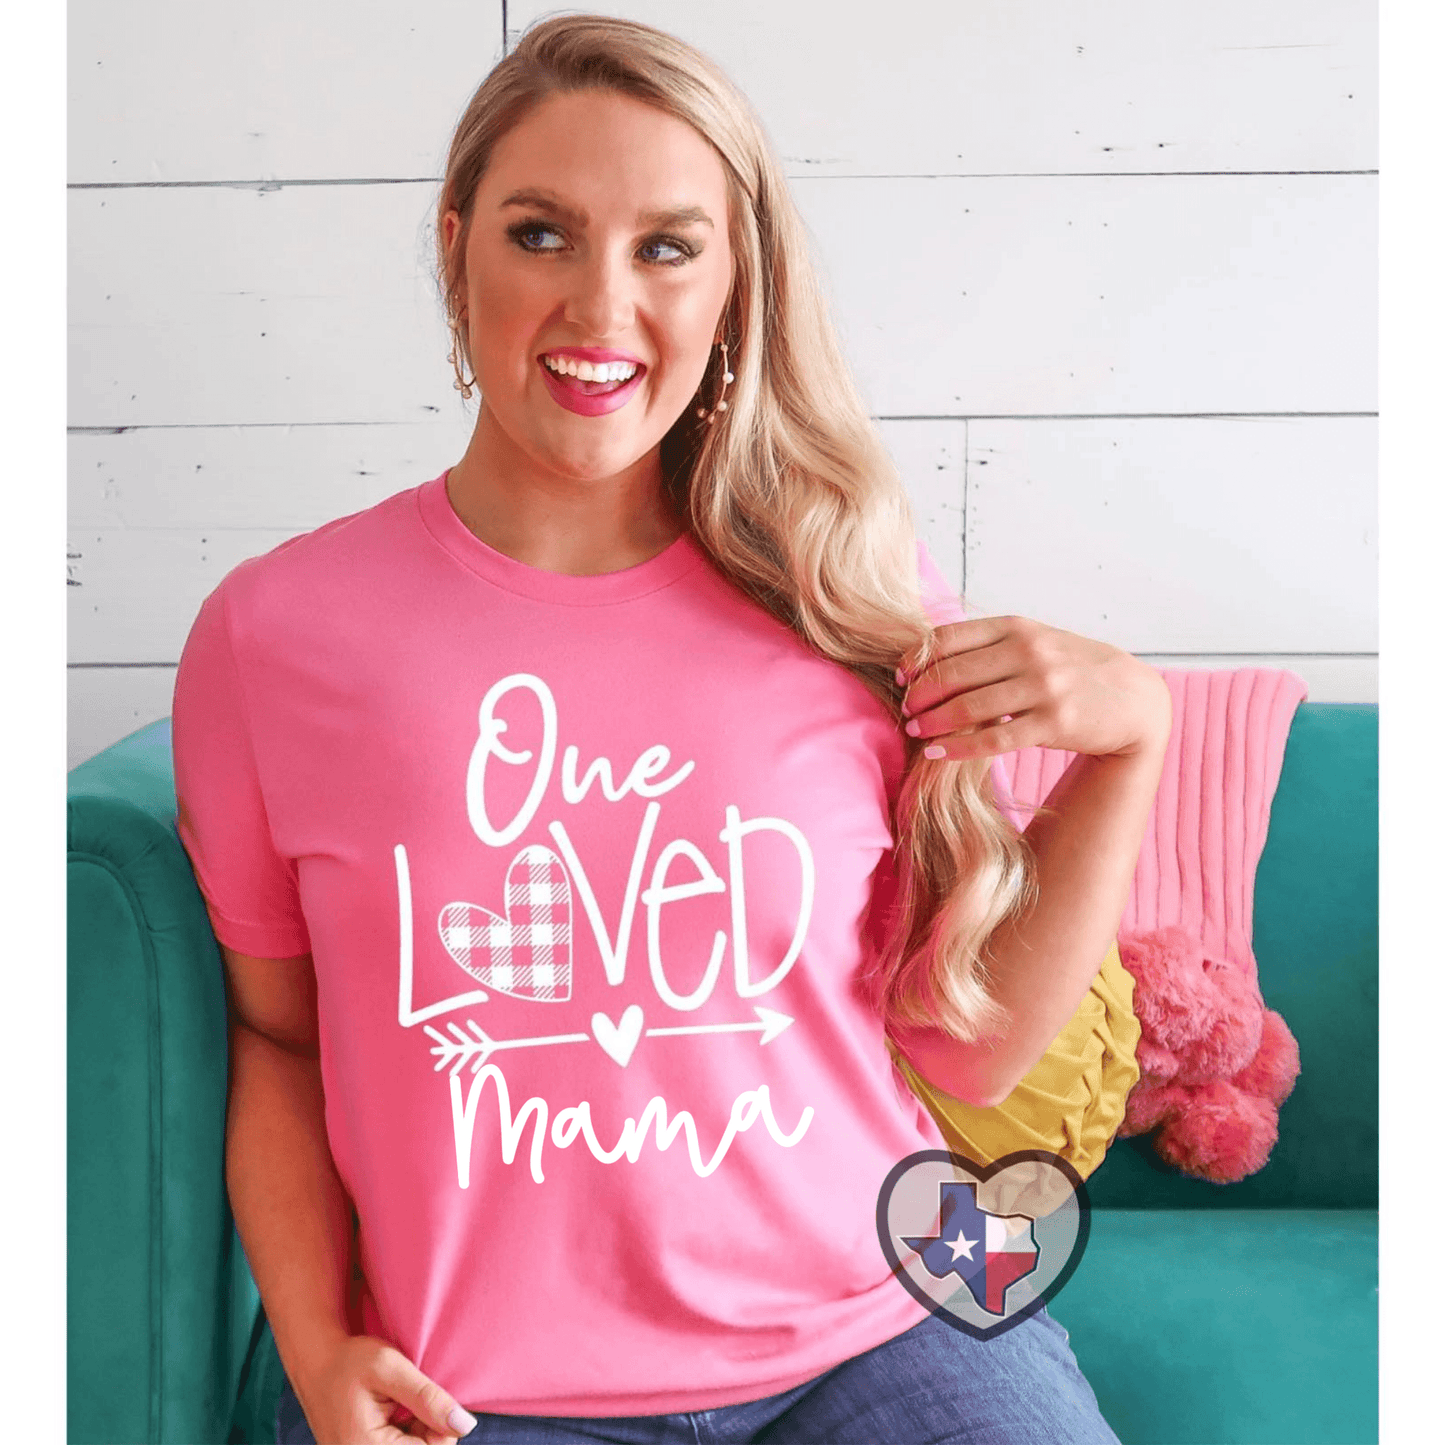 One Loved ... *CUSTOMIZABLE* - Texas Transfers and Designs